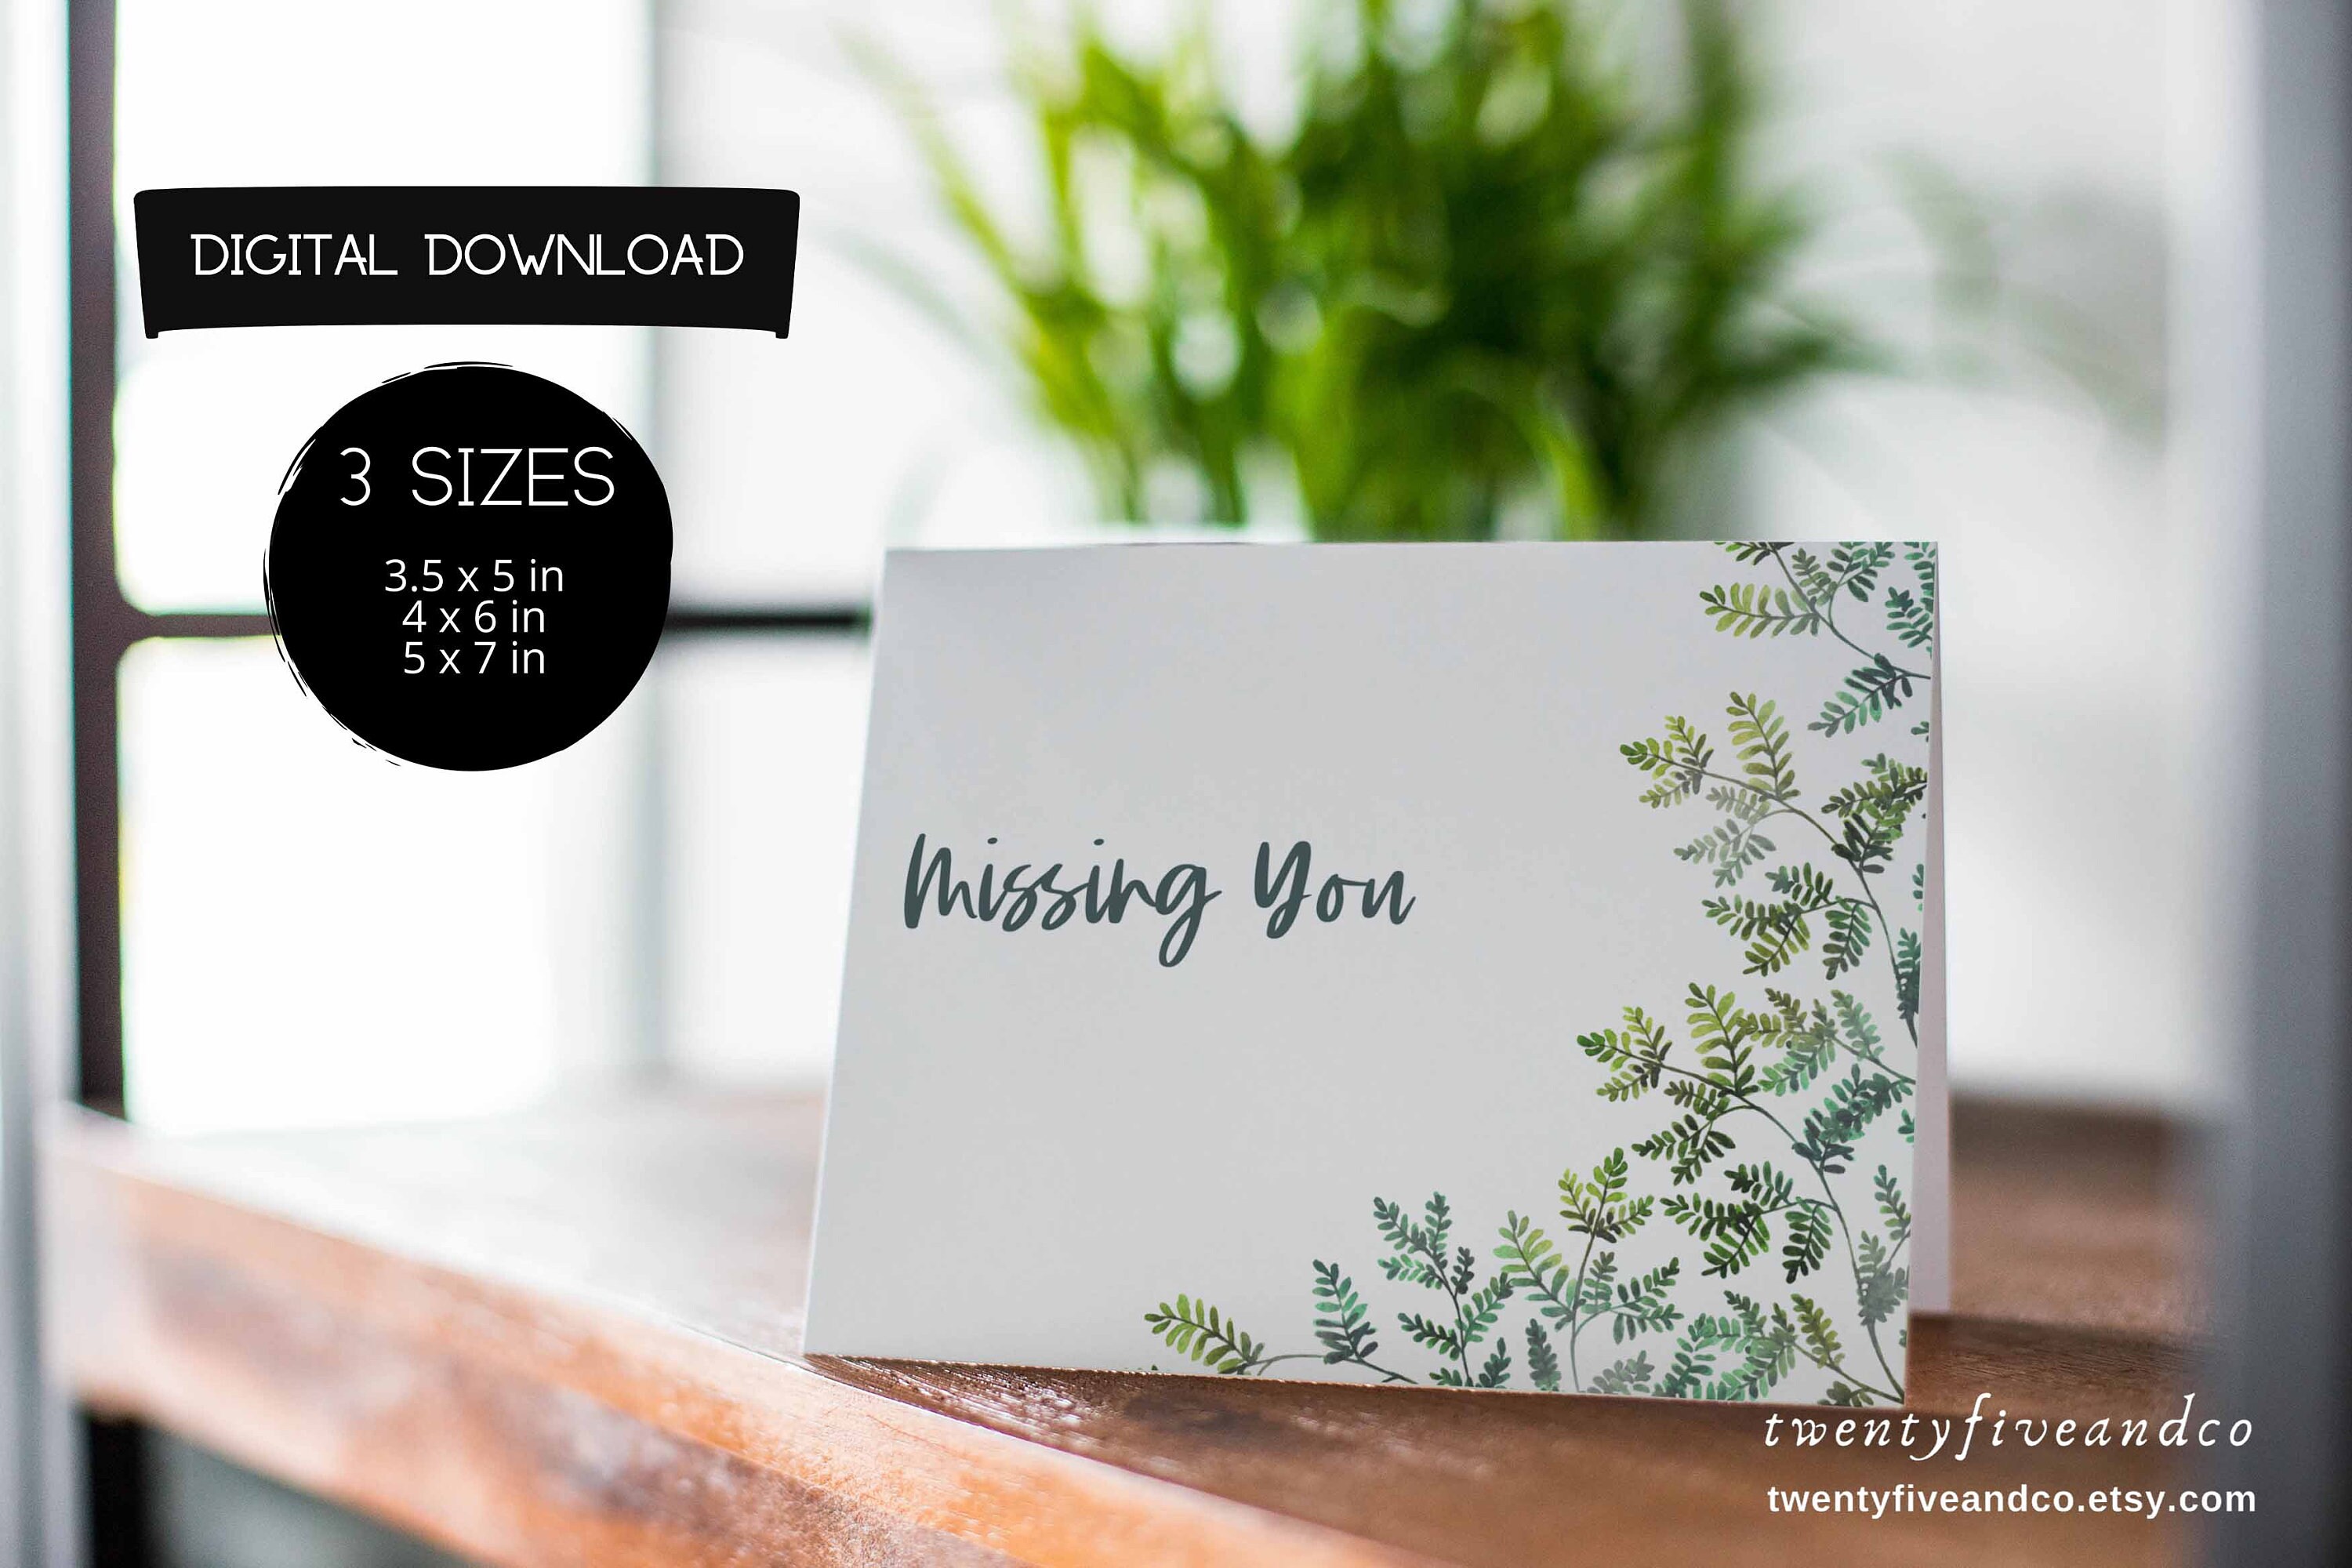 Card Mockup Open, 4x6 Greeting Card Front and Back Mockup for